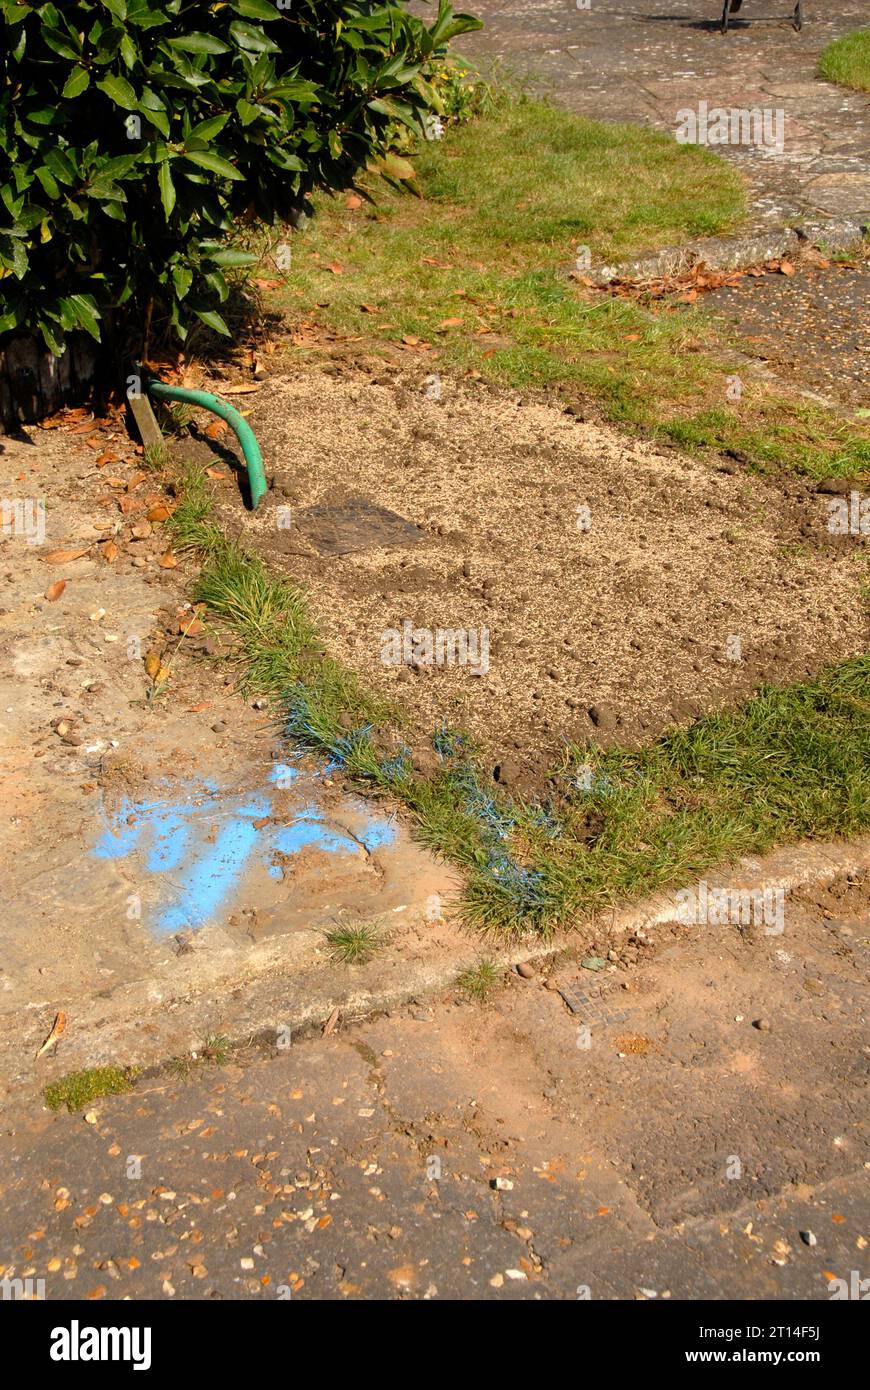 Grass area reseeded after replacing leaking water meter for domestic property Stock Photo